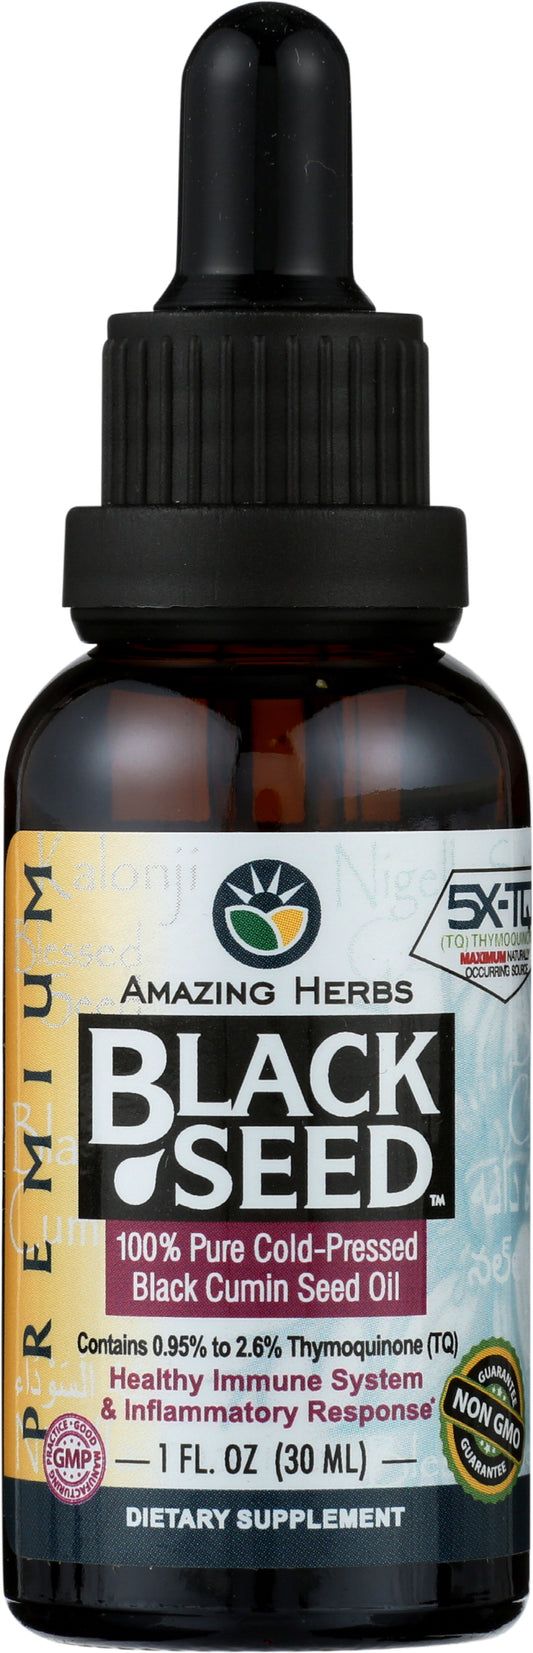 Amazing Herbs Black Seed Oil 1 fl oz Front of Bottle